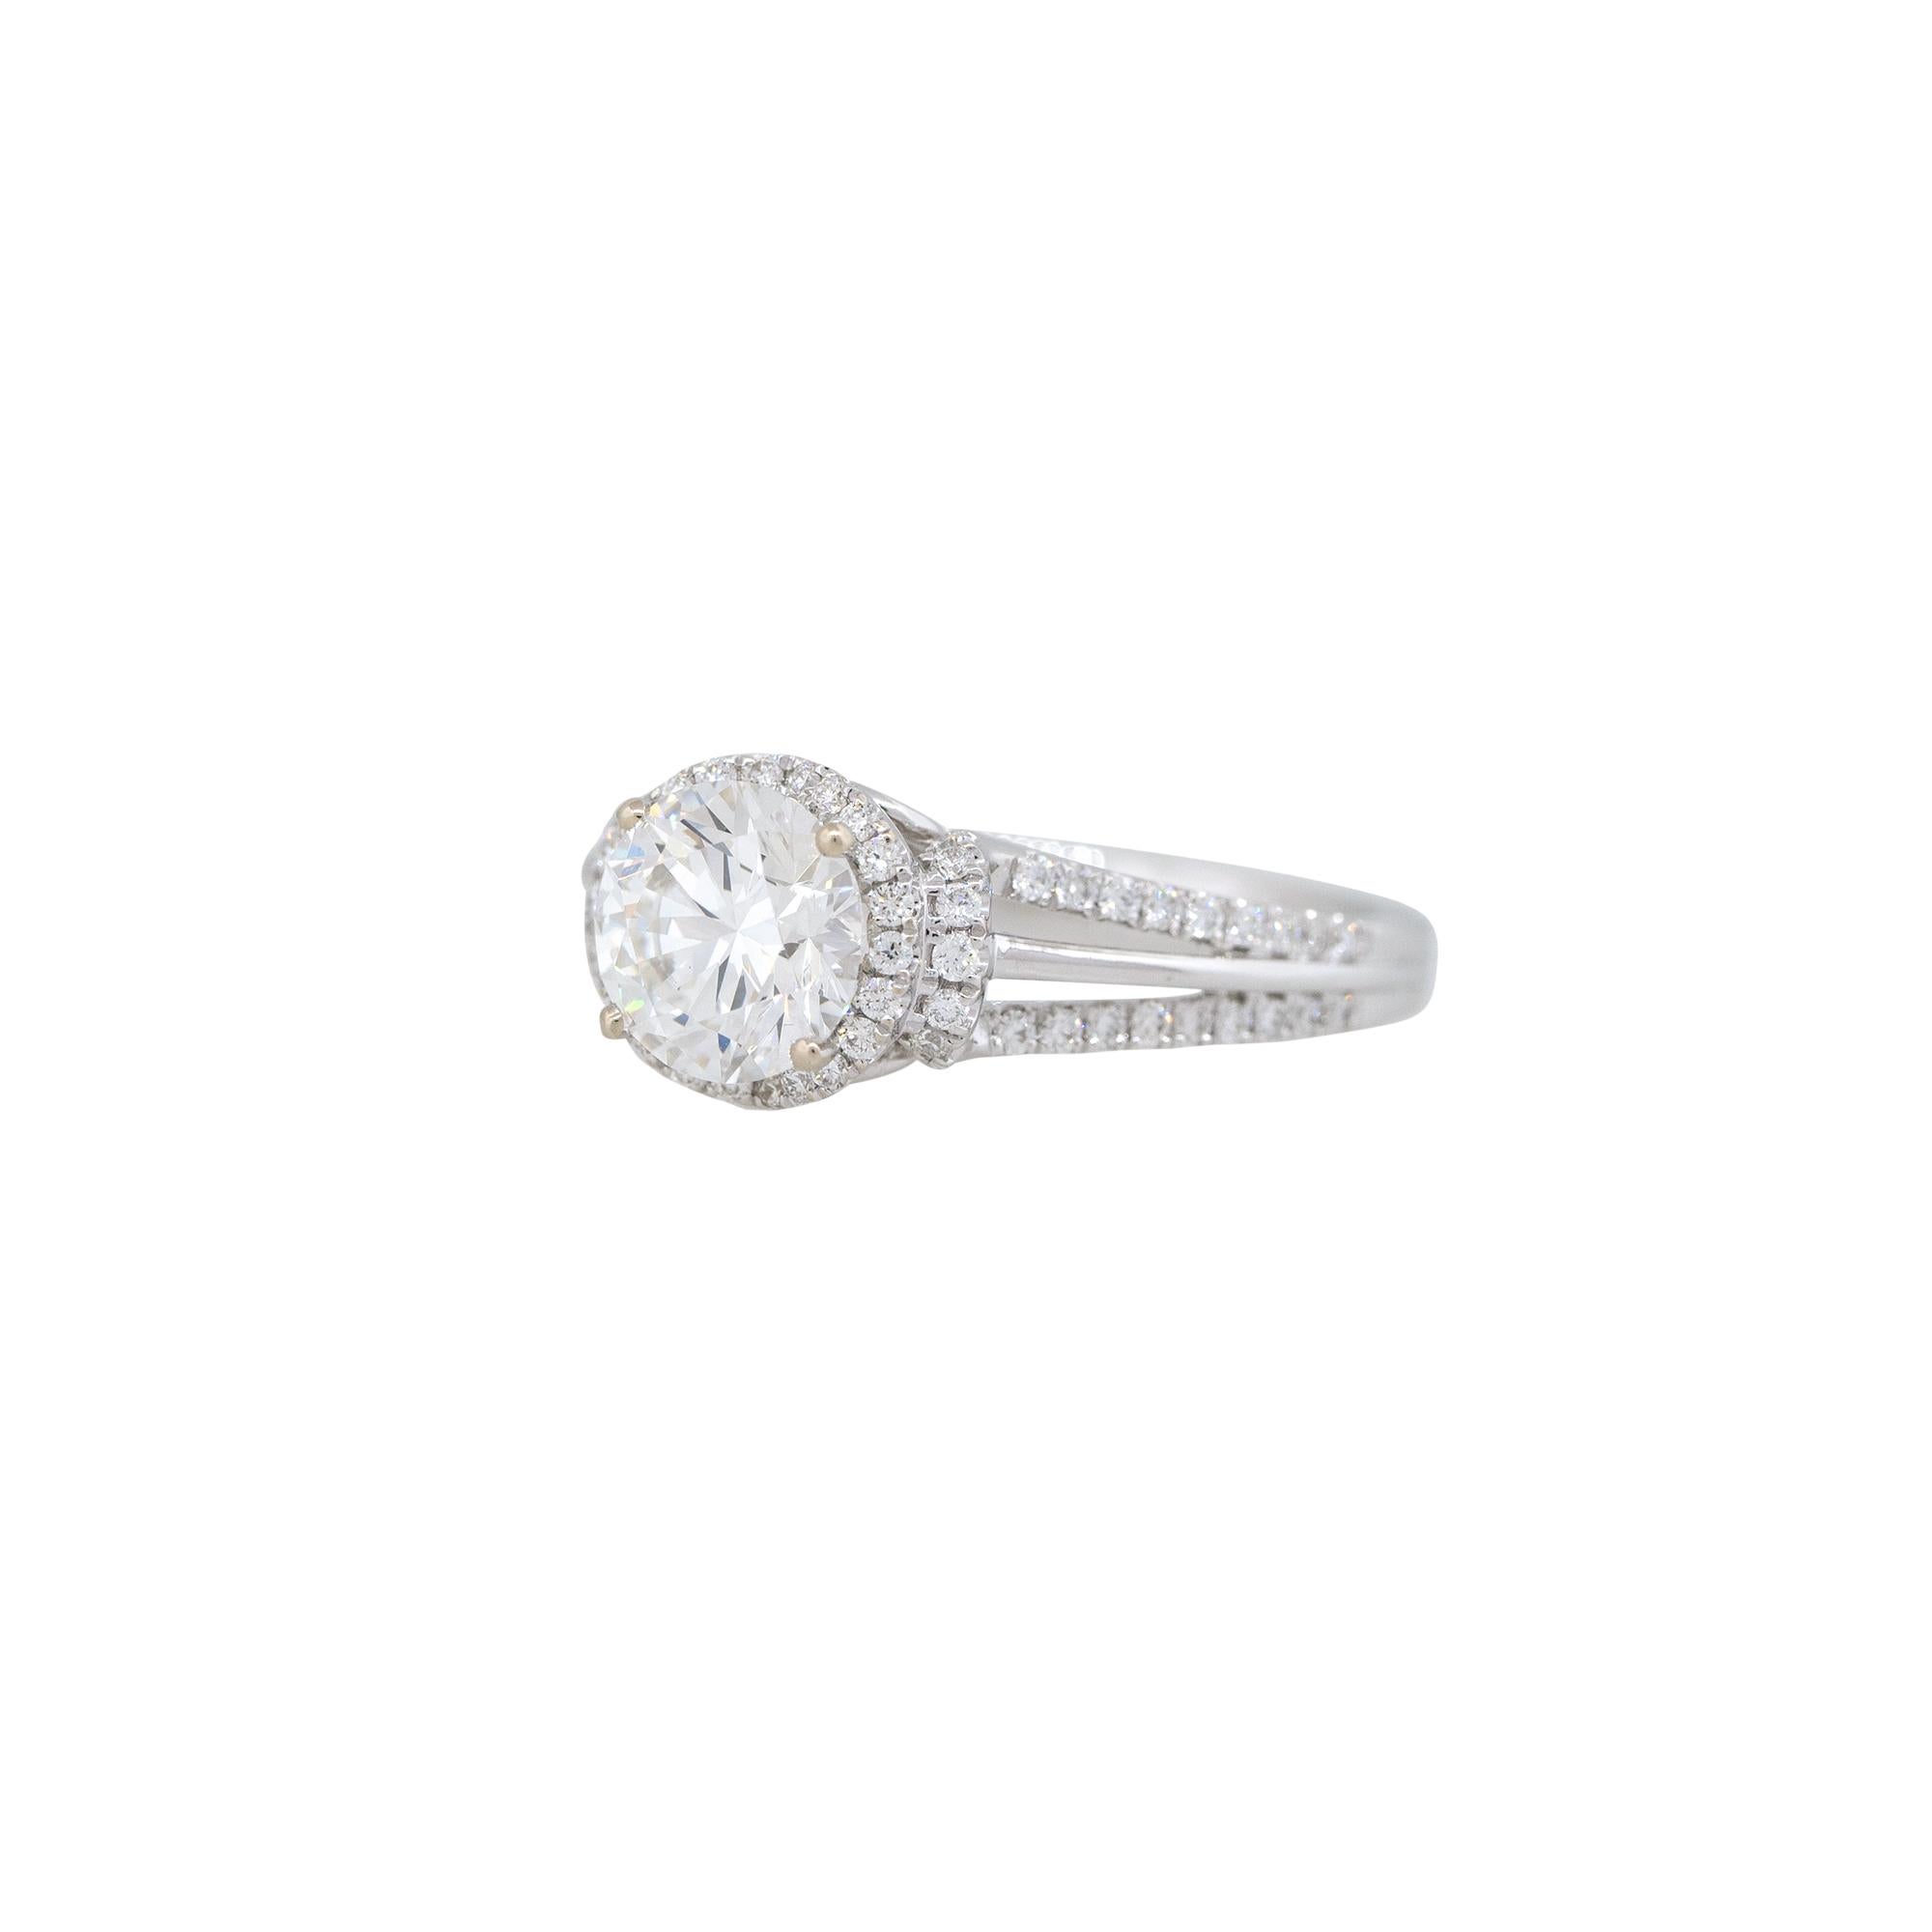 GIA Certified 18k White Gold 1.79ctw Round Brilliant Cut Diamond Engagement Ring 

Product: Round Brilliant Diamond Engagement Ring
Material: 18k White Gold
GIA Diamond Details: The main Diamond comes with a GIA Certificate, Certificate #